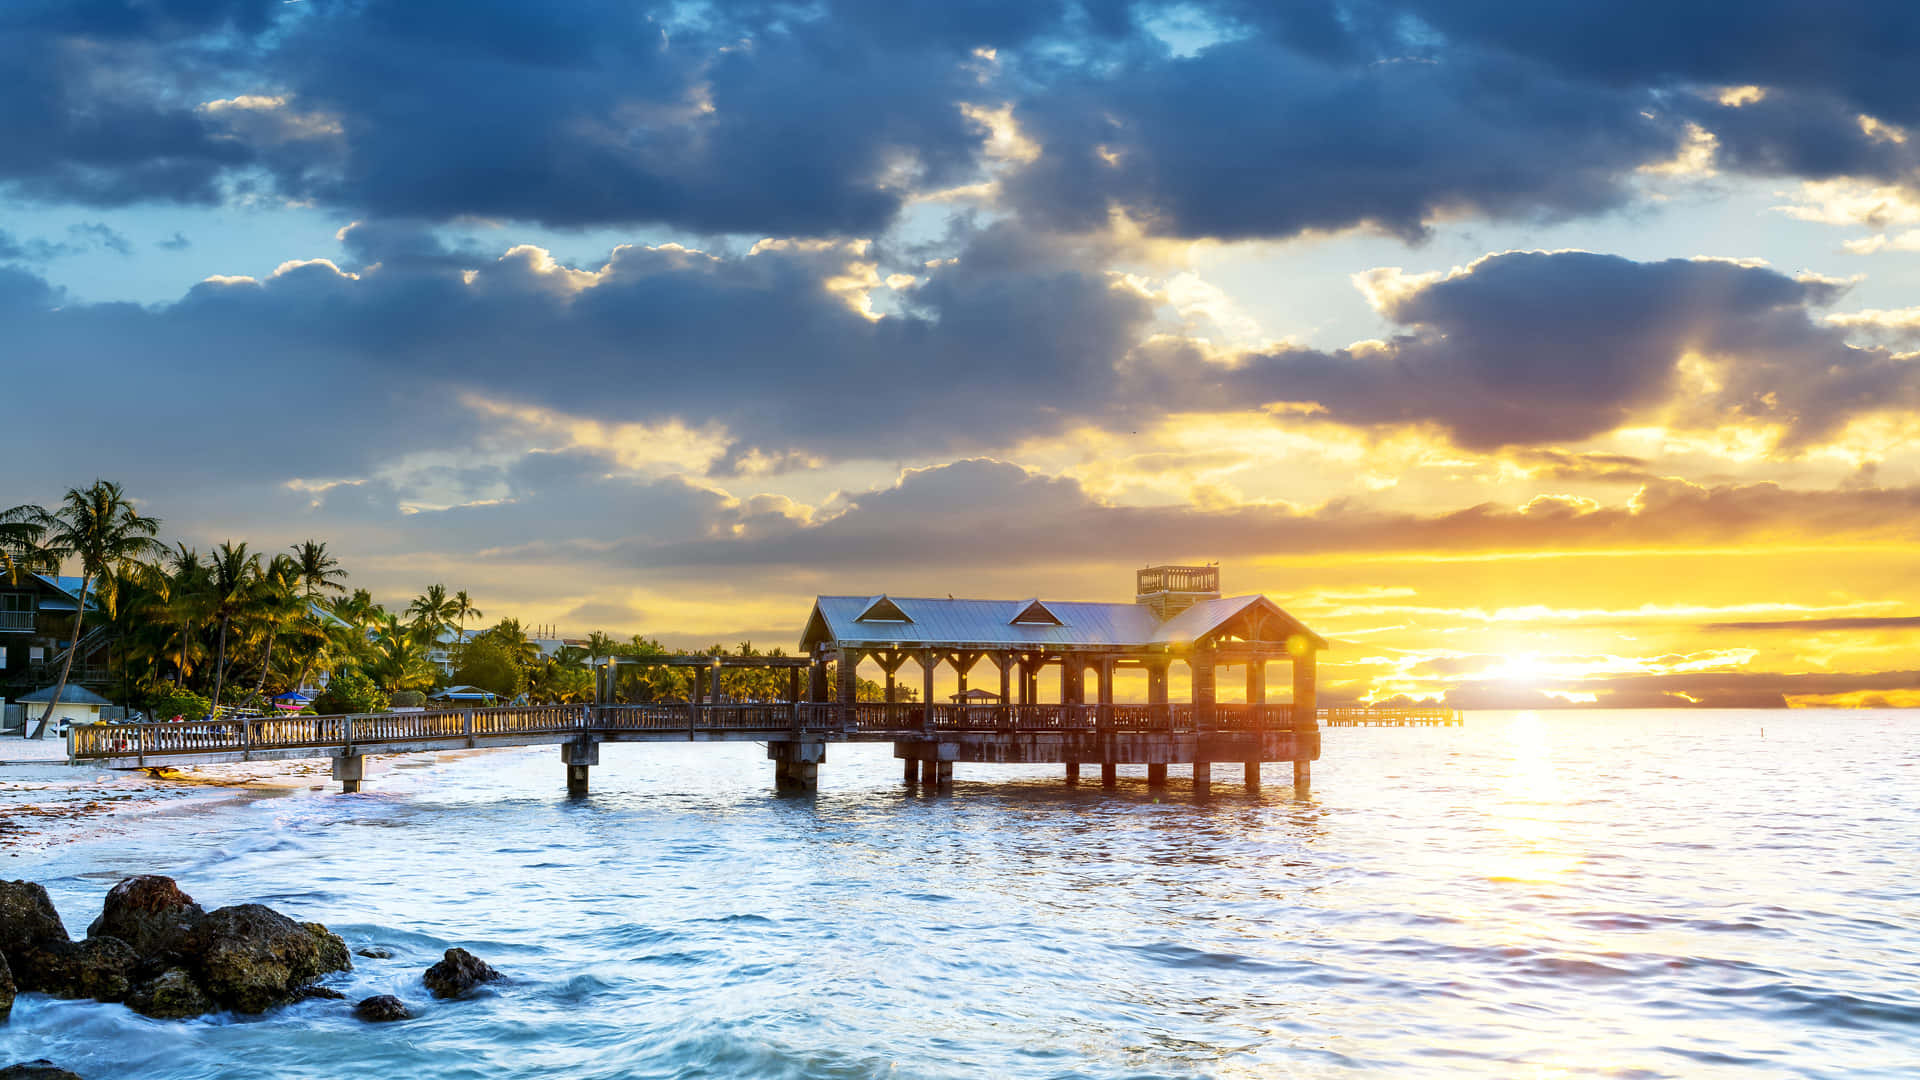 Soak up the local culture in the tropical breeze of Key West!